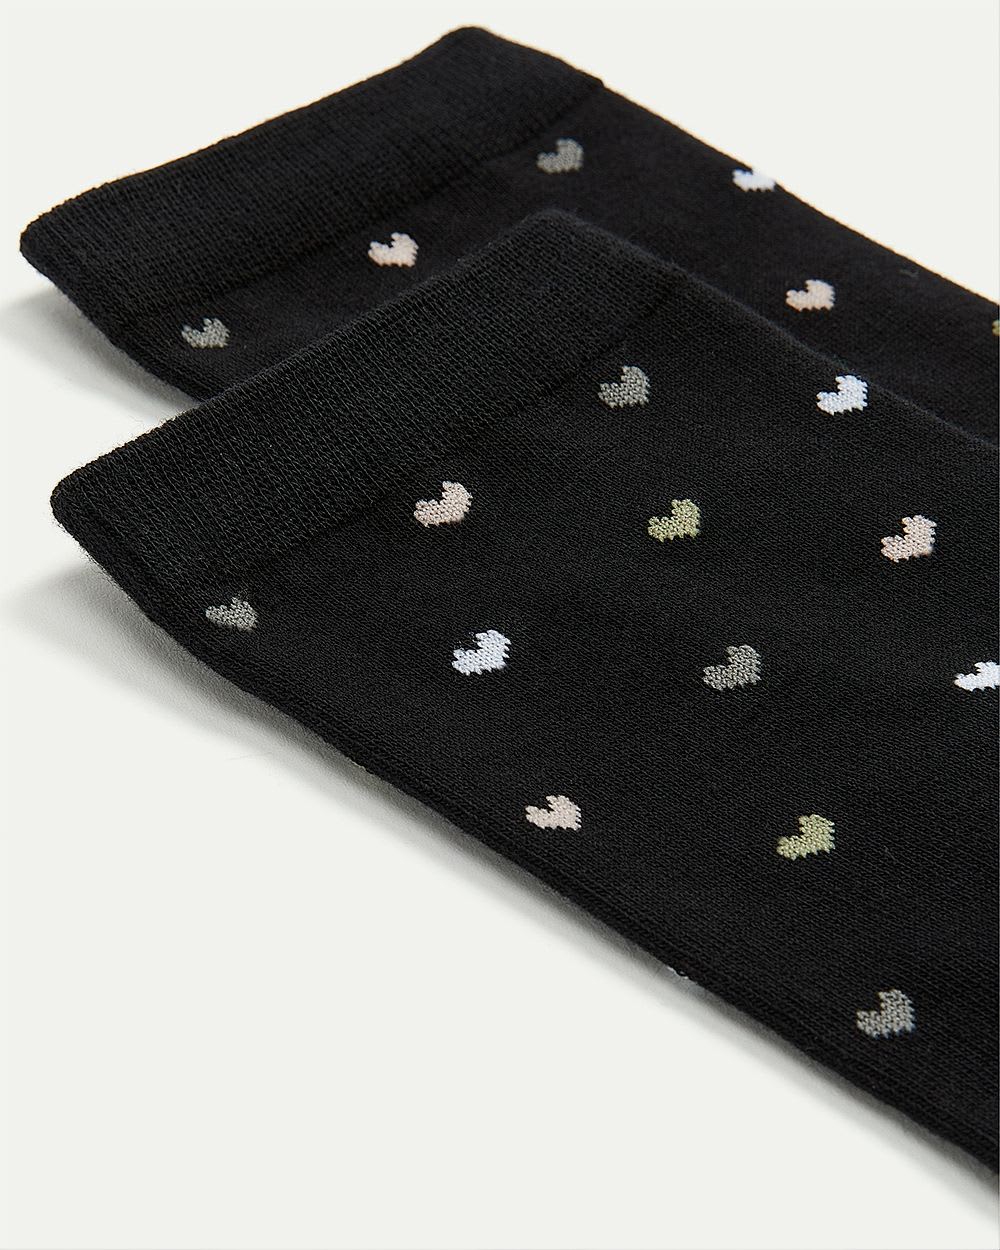 Cotton Socks with Hearts